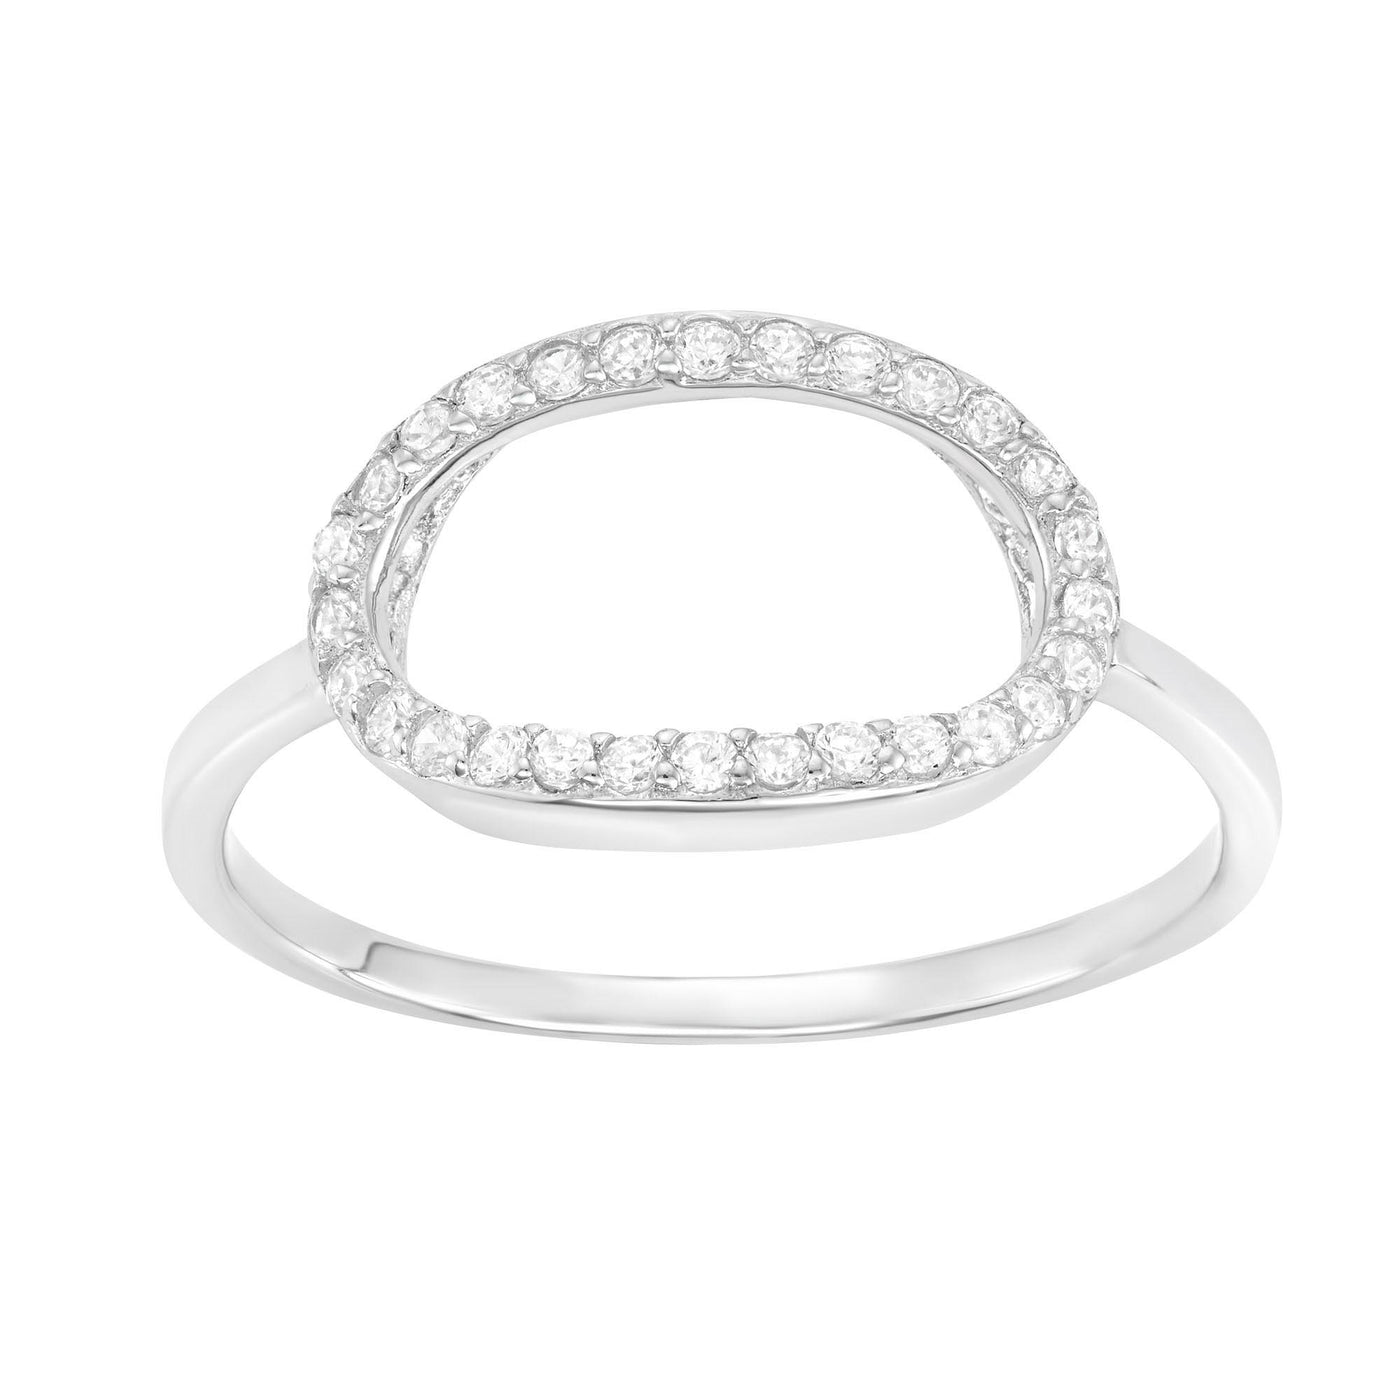 Rebecca Sloane Sterling Silver Open Oval Ring With CZ Stones